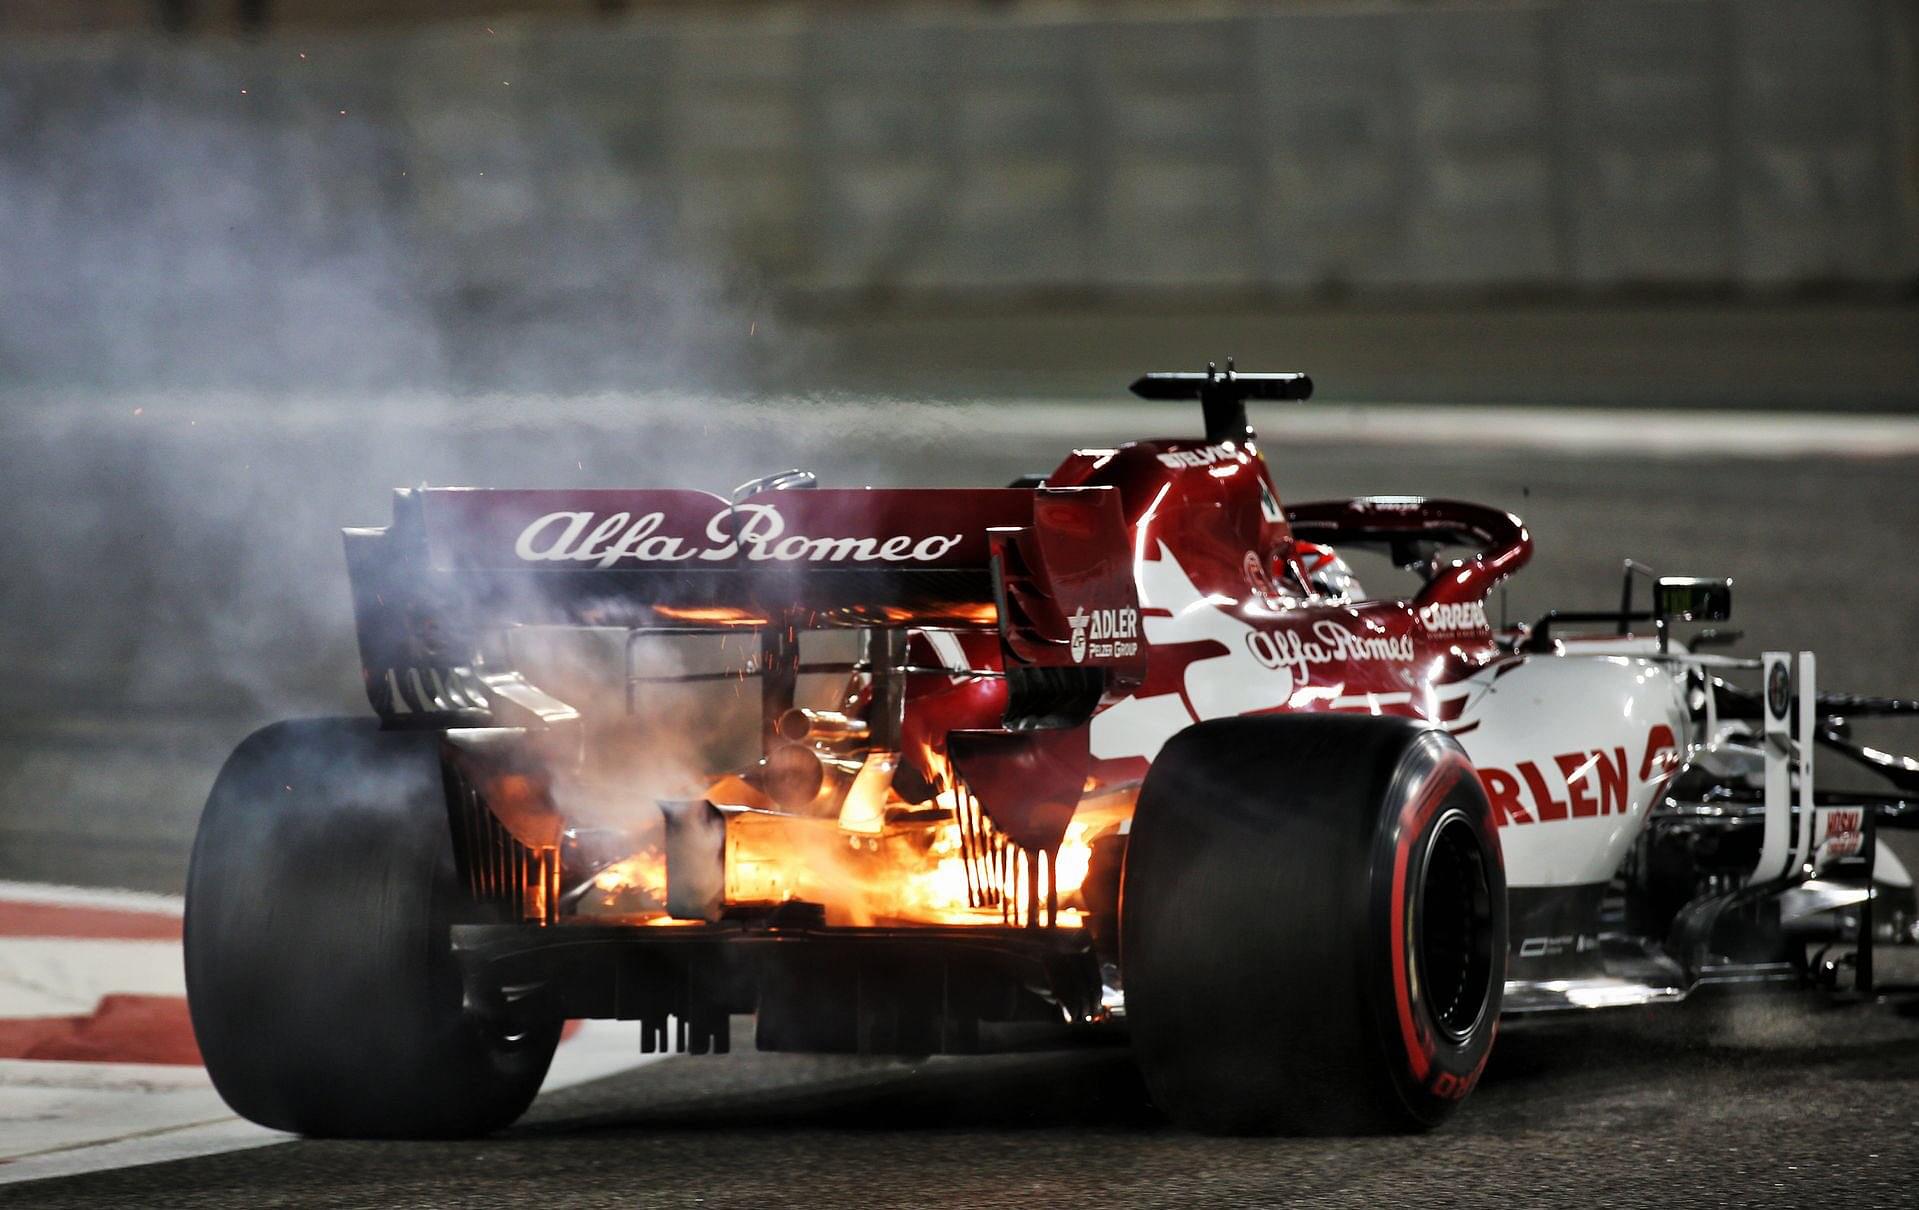 "It is not many days before the first race" - Kimi Raikkonen hoping Alfa Romeo can begin season on a high with Bahrain Grand Prix